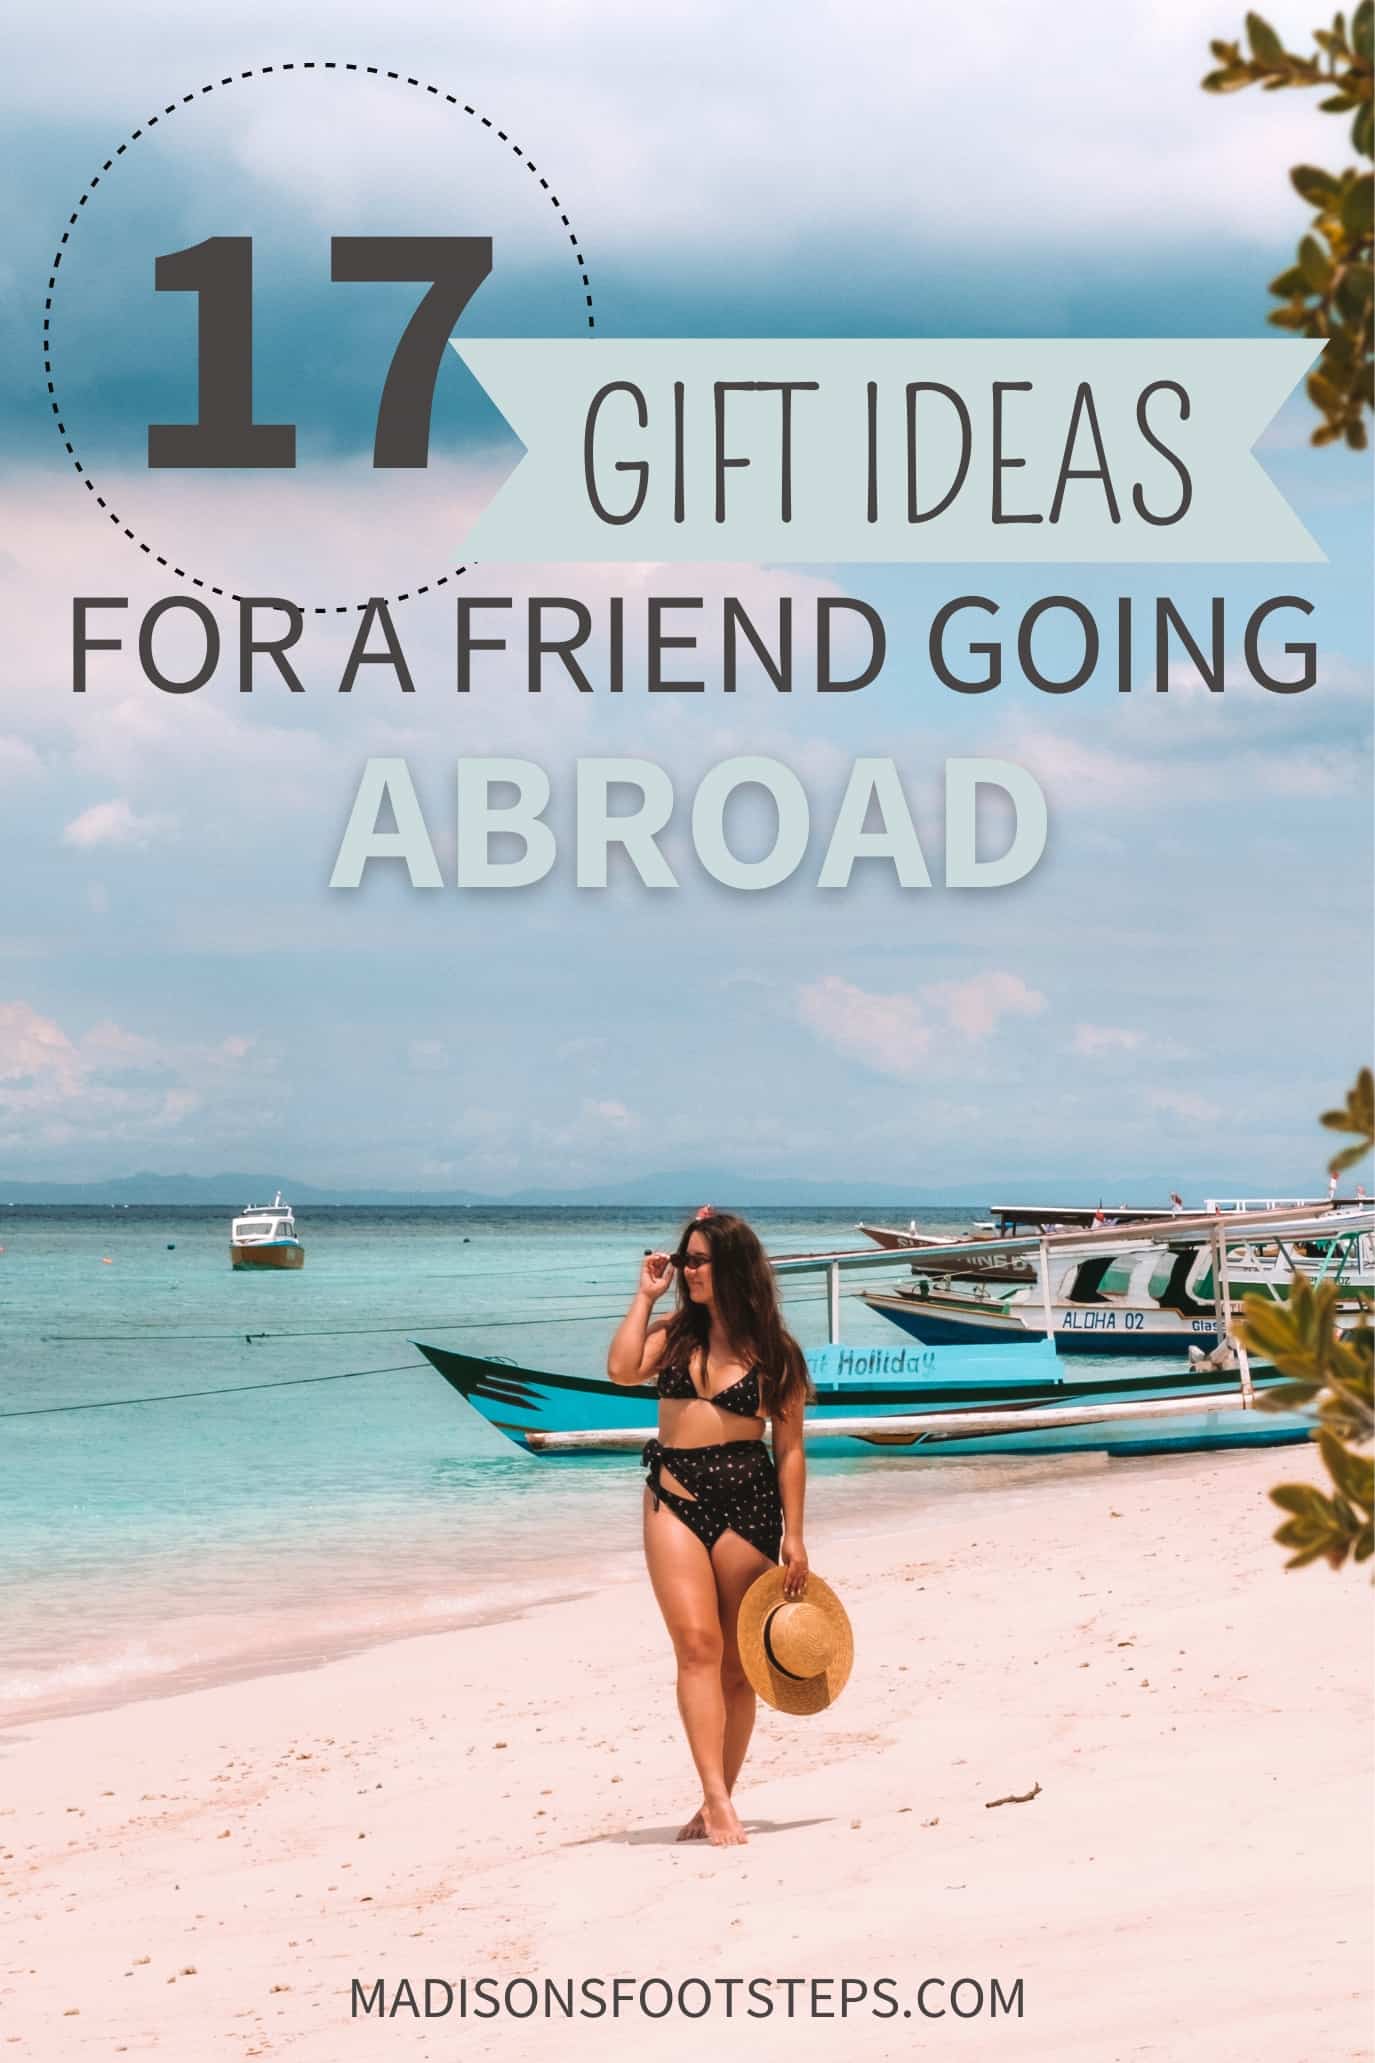 How You Can Send Thoughtful Gifts to Loved Ones While Abroad